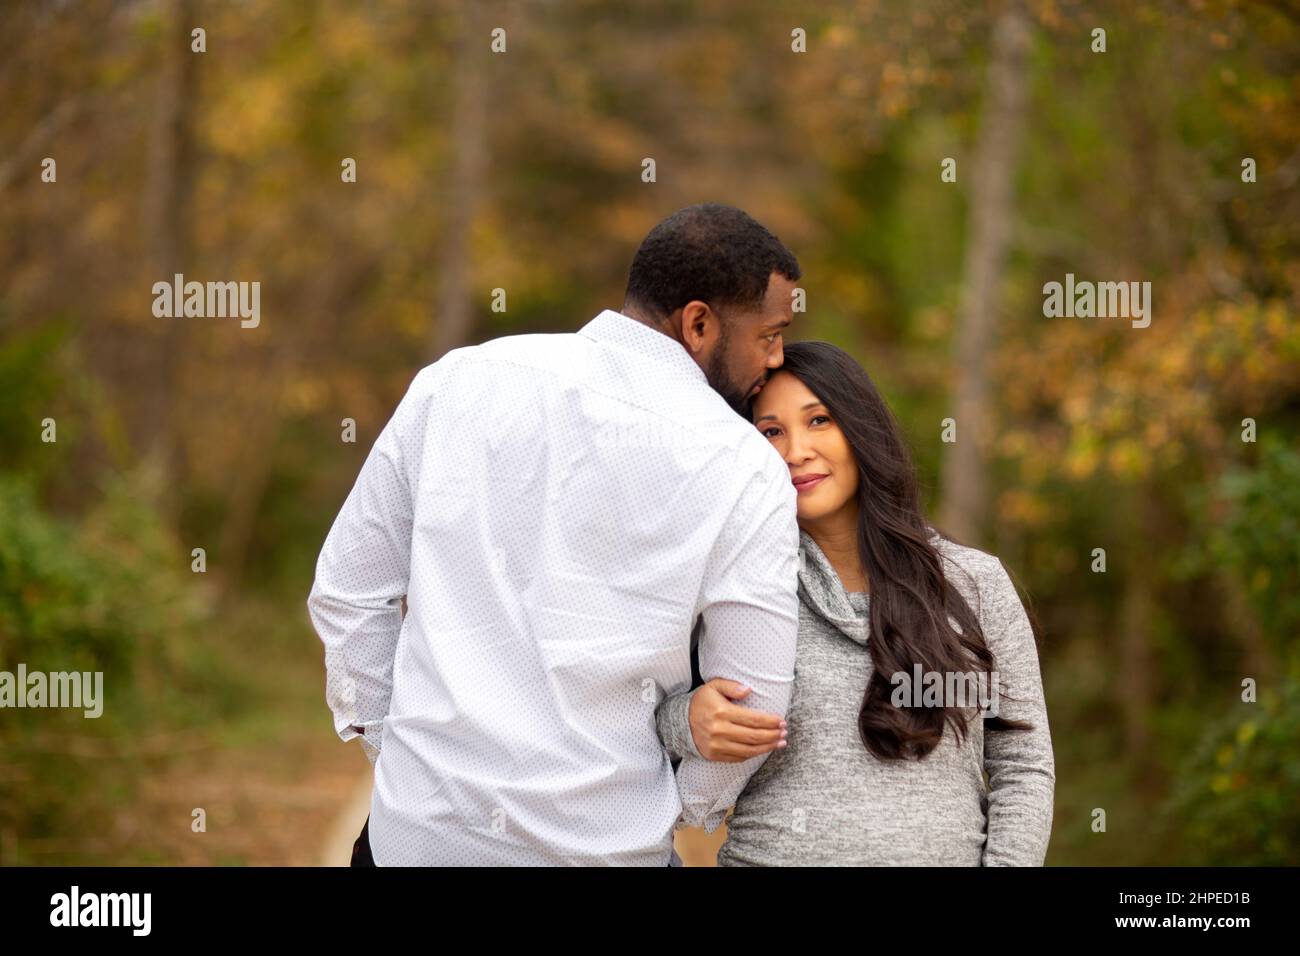 Portrait of a mixed race couple who are expecting parents Stock Photo